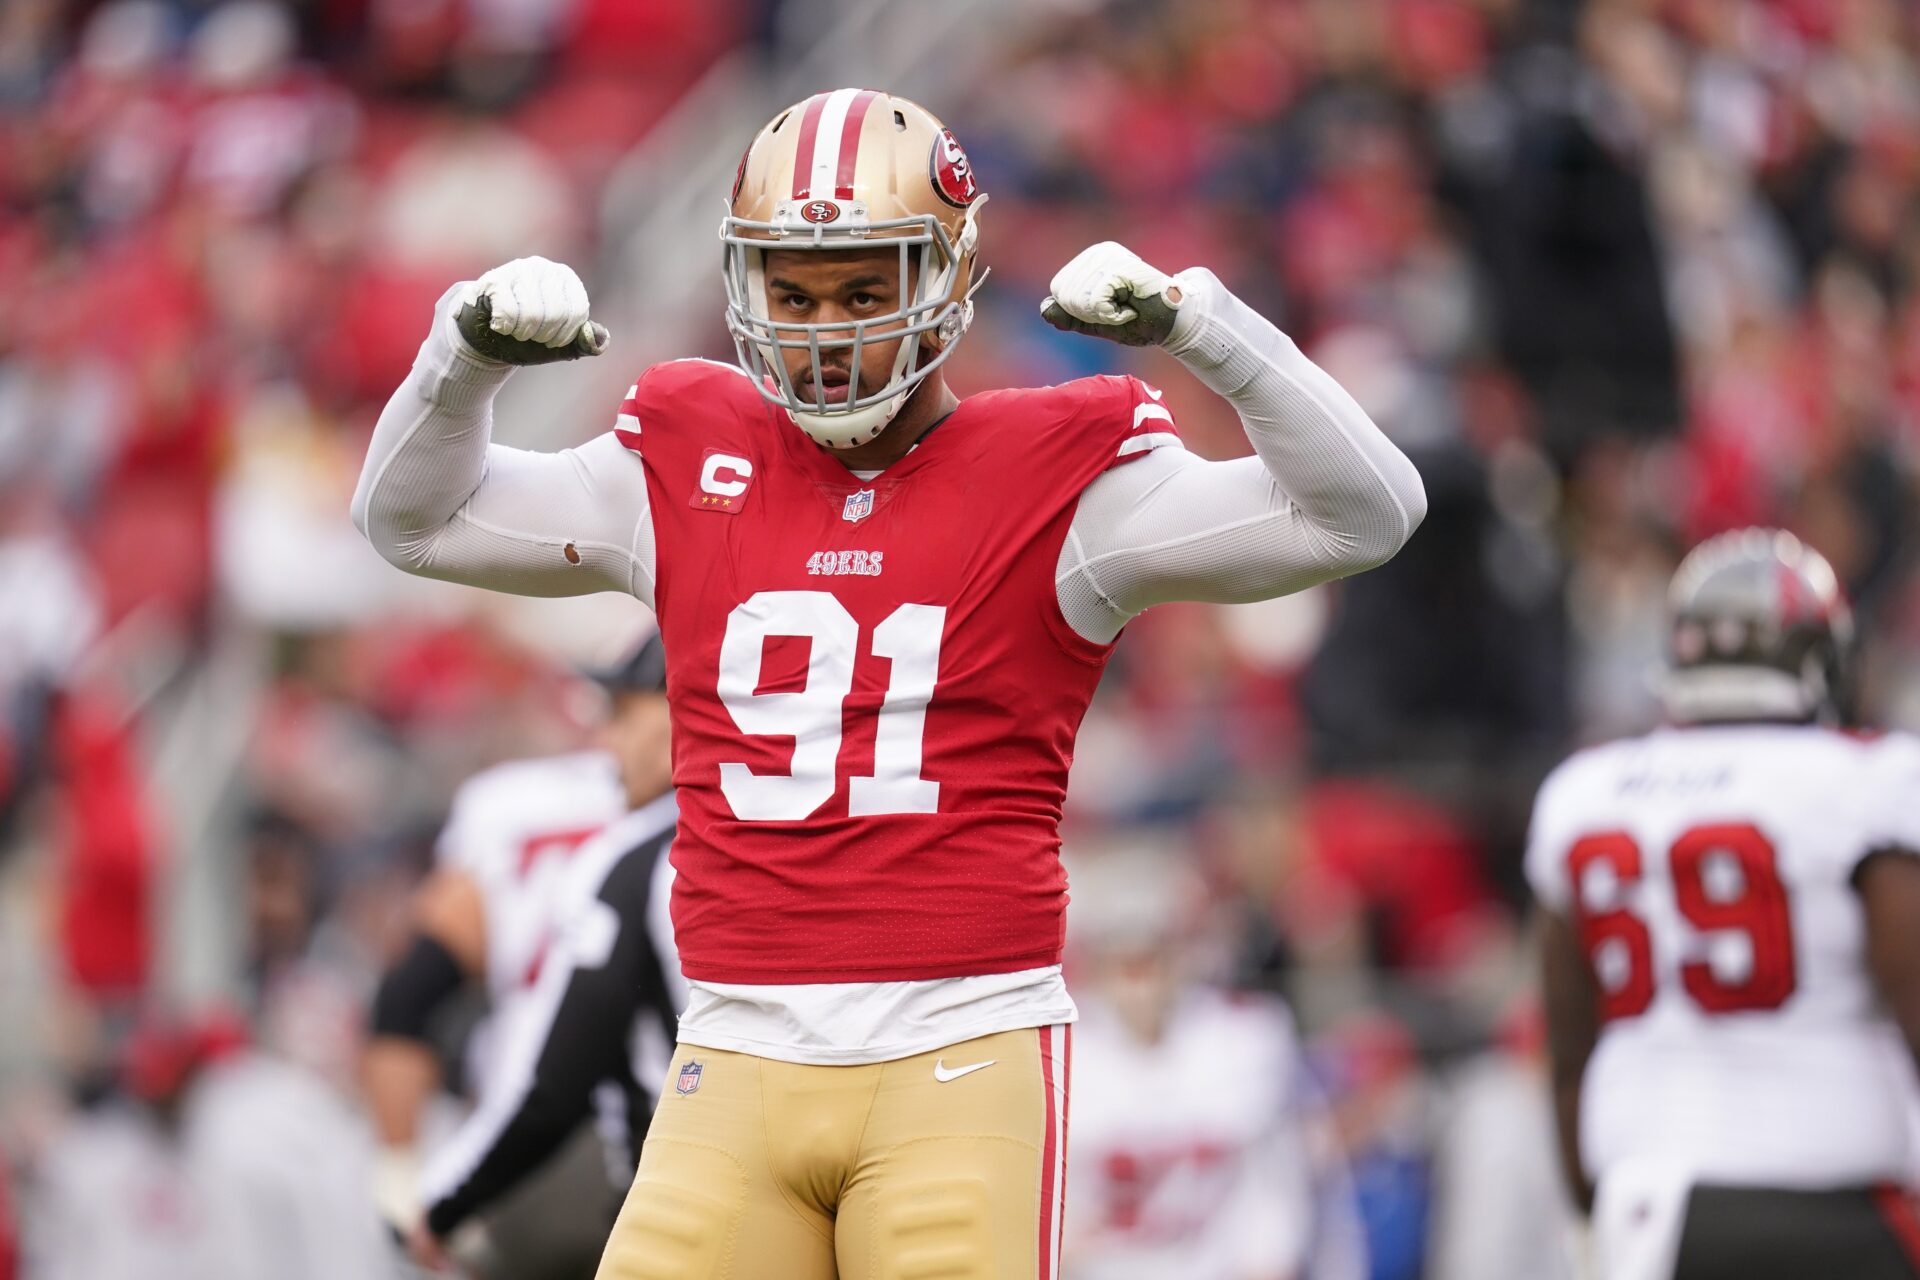 Arik Armstead (91) reacts after the 49ers made a defensive stop on third down against the Tampa Bay Buccaneers in the second quarter at Levi's Stadium.